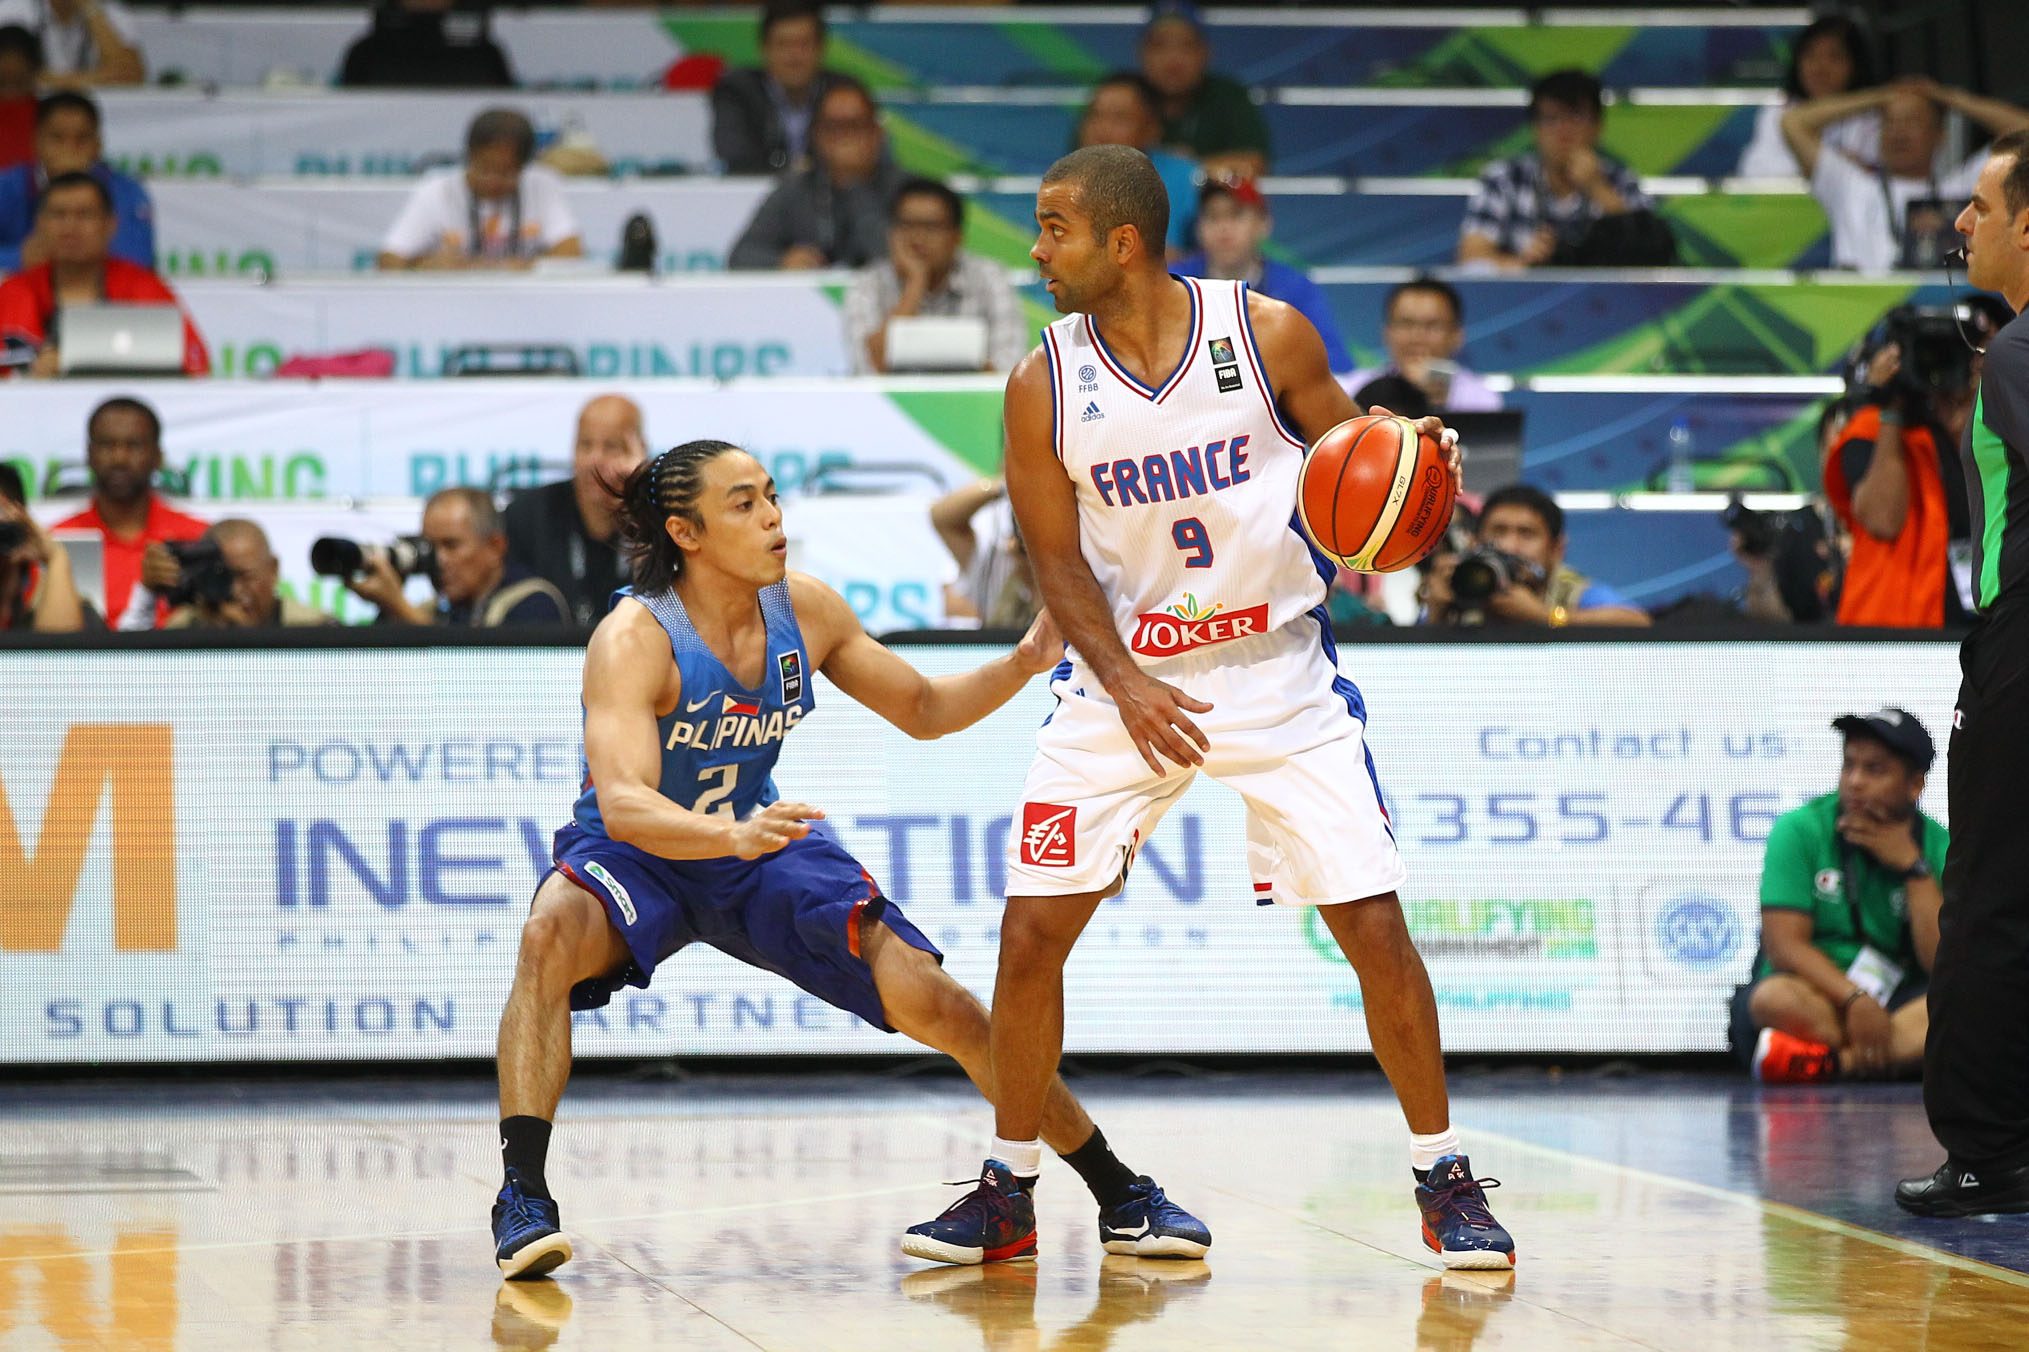 Terrence Romeo defends against France's Tony Parker, who plays for the San Antonio Spurs in the NBA 